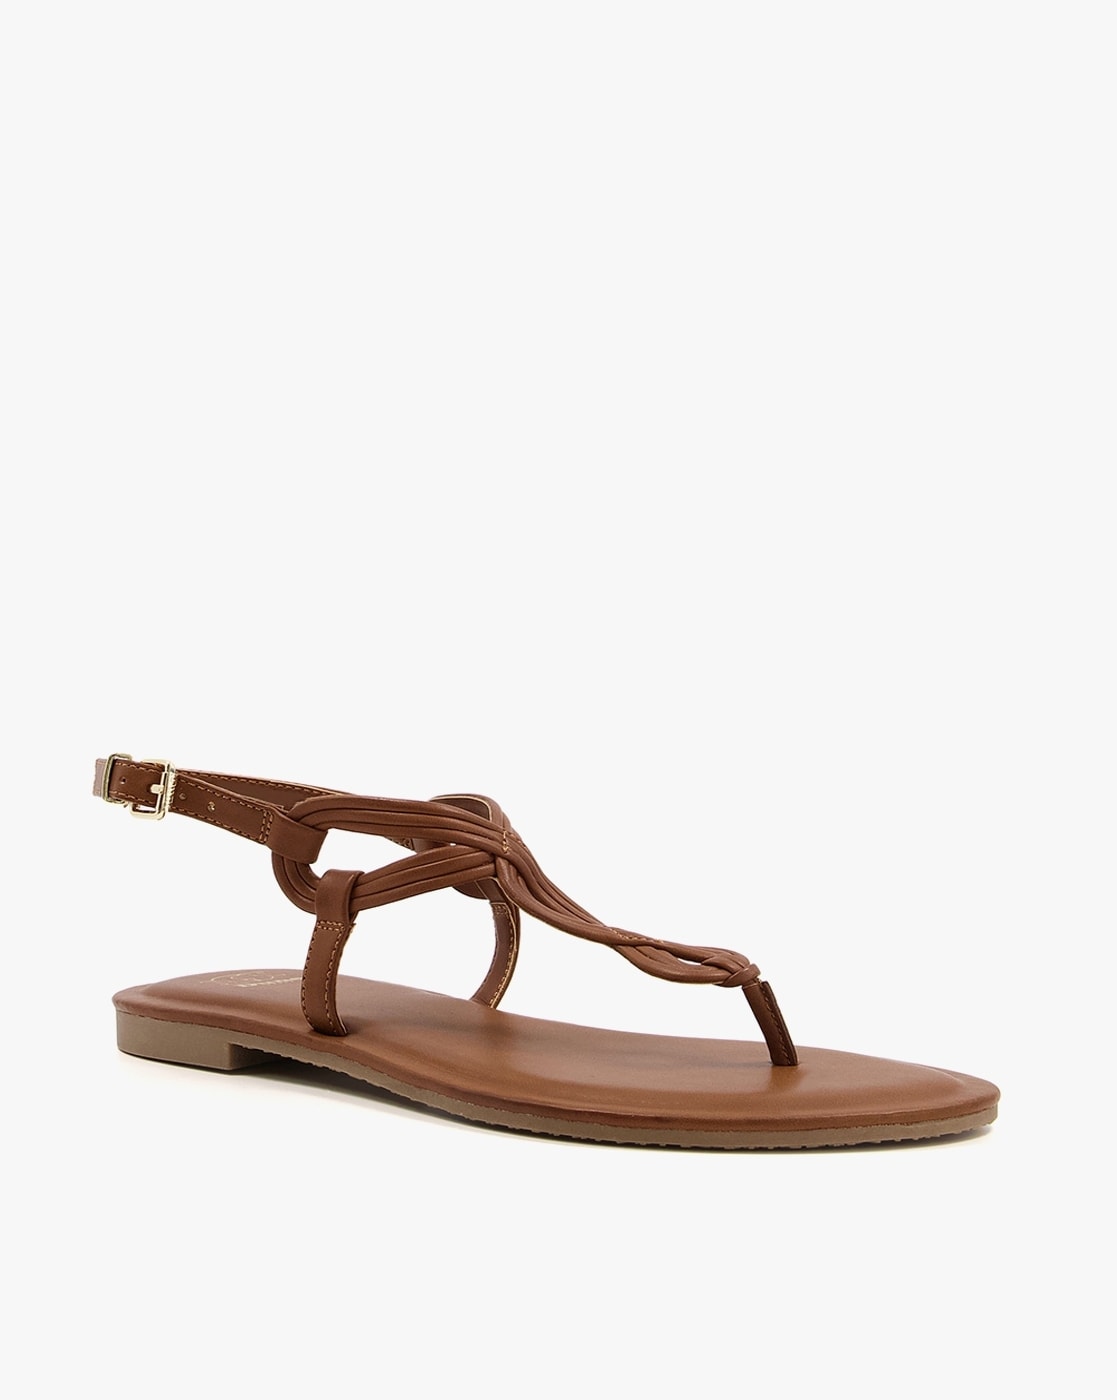 Buy armani sandals Online in South Africa at Low Prices at desertcart